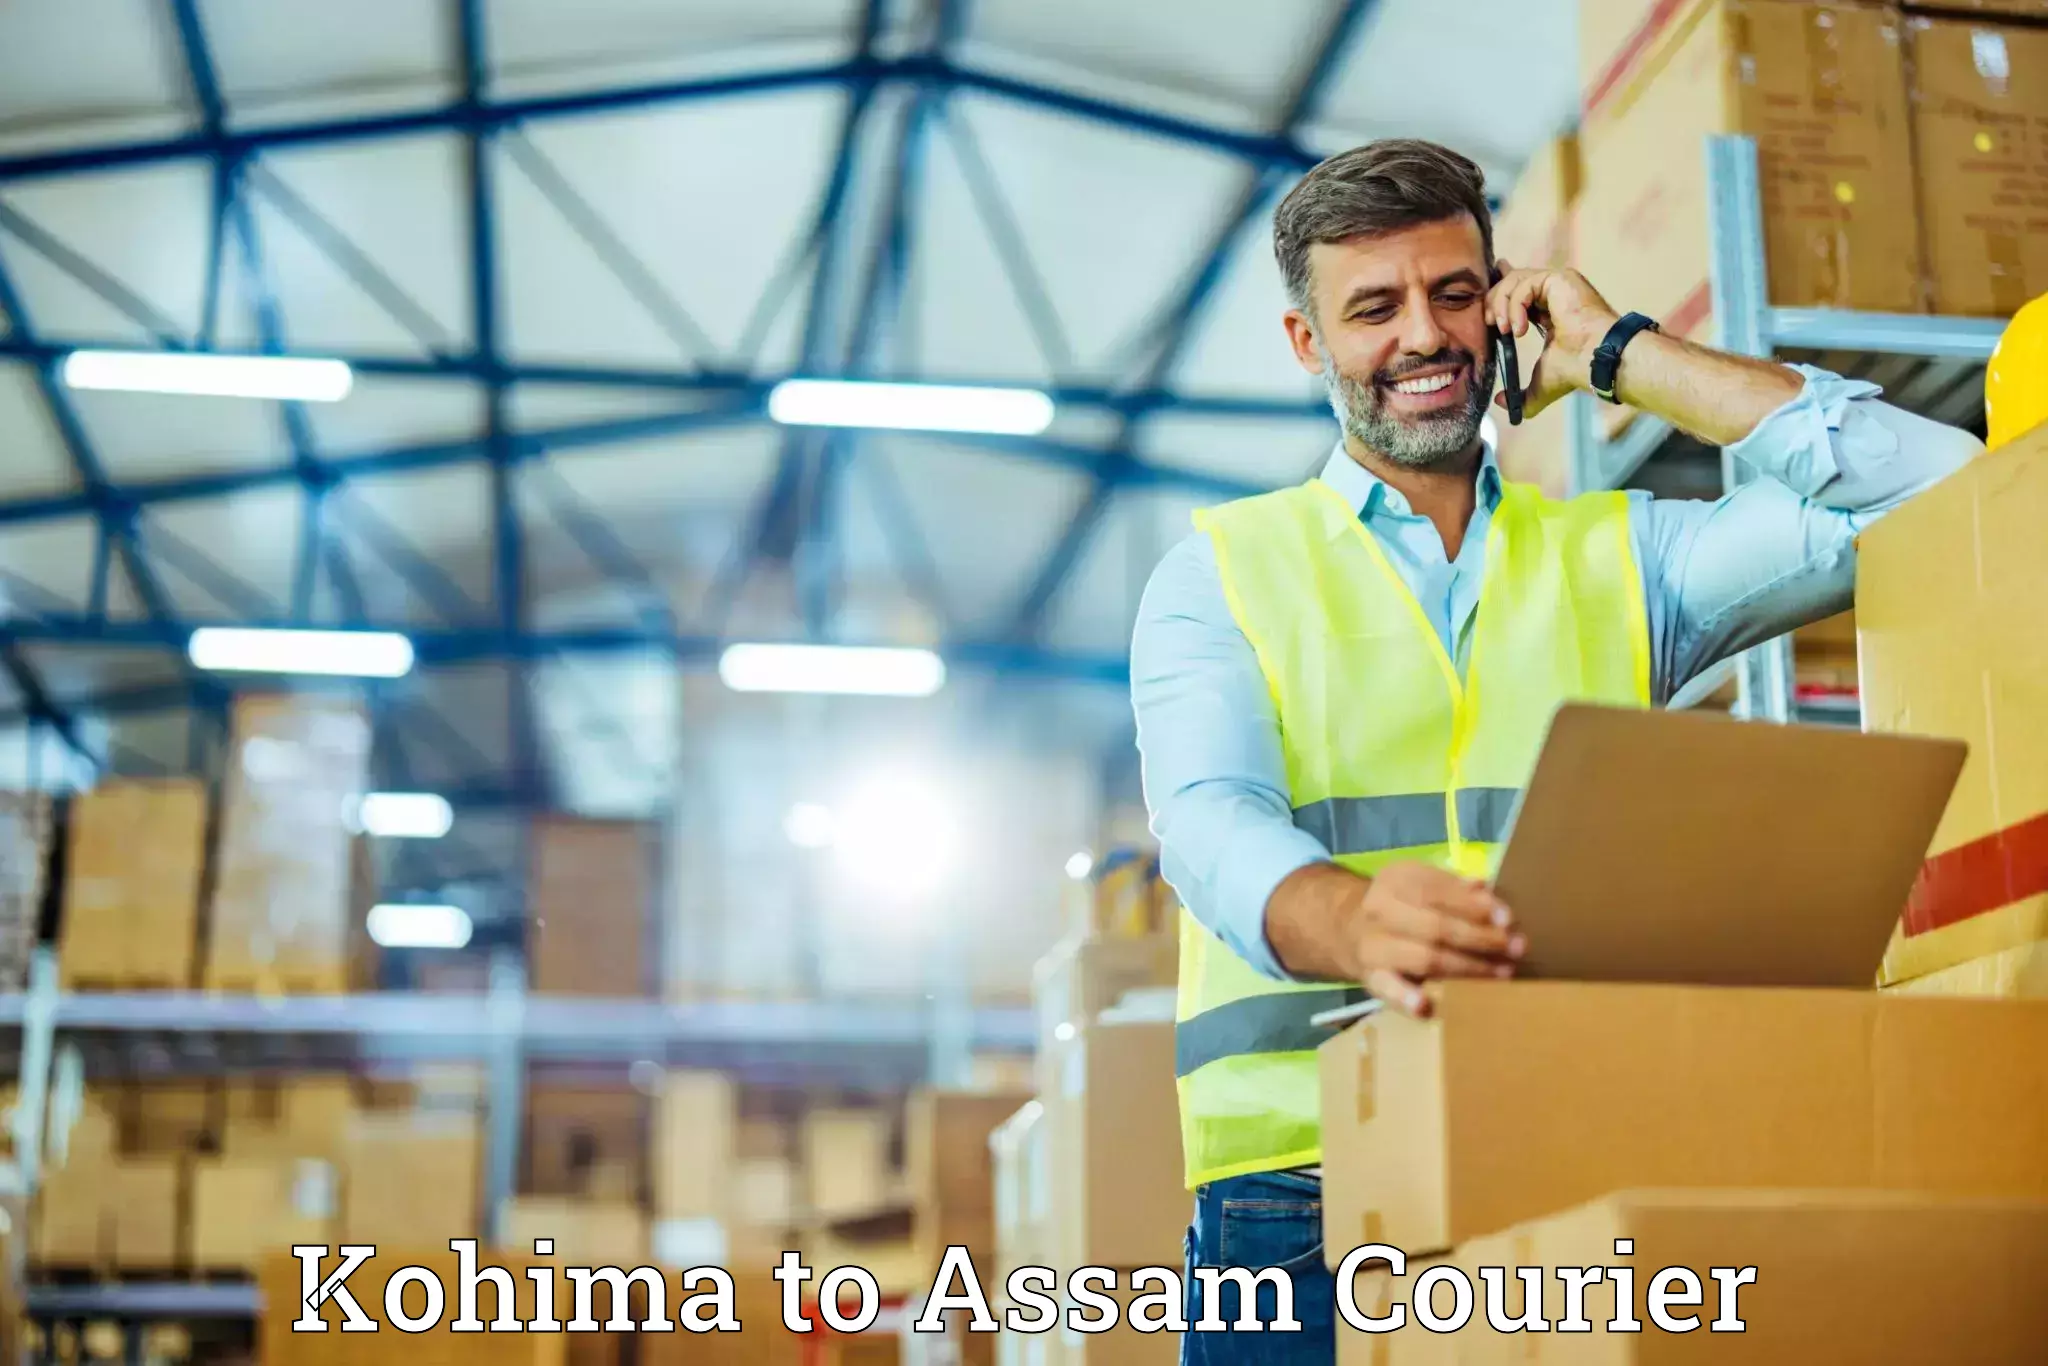 Comprehensive moving services in Kohima to Nagaon